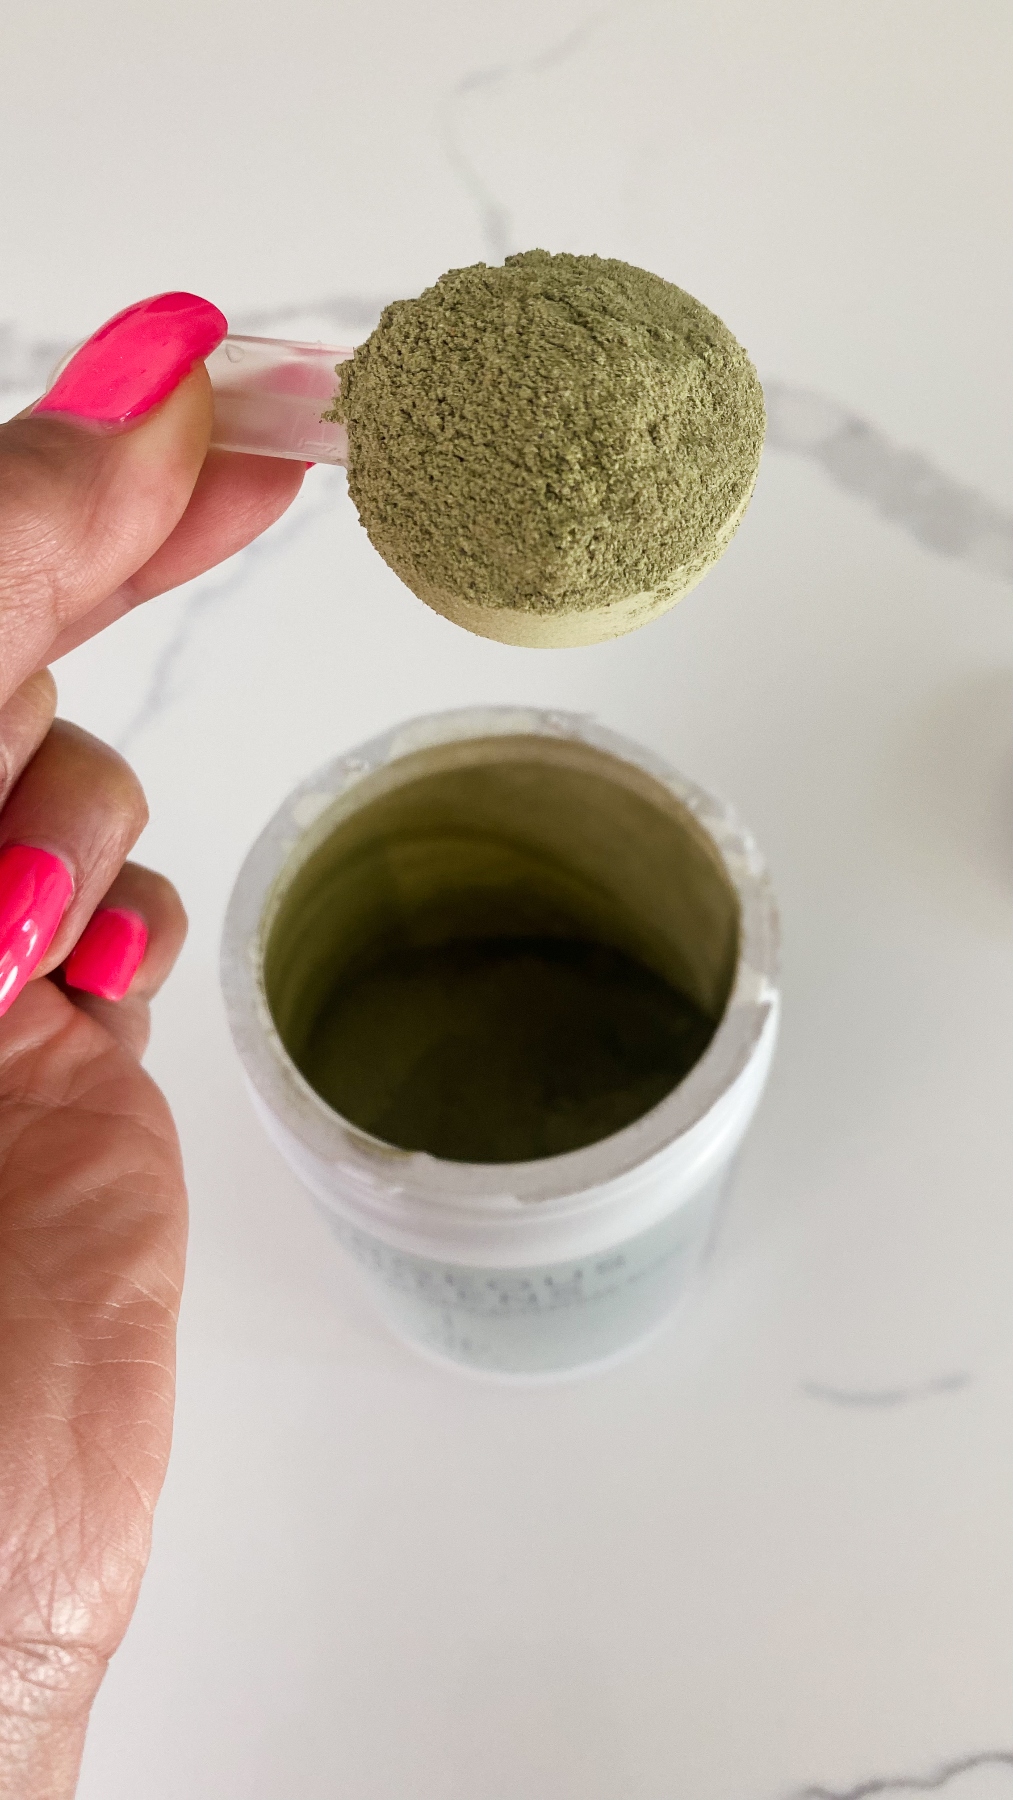 Ajna Wellbeing Gorgeous Greens Powder Close-Up Shot